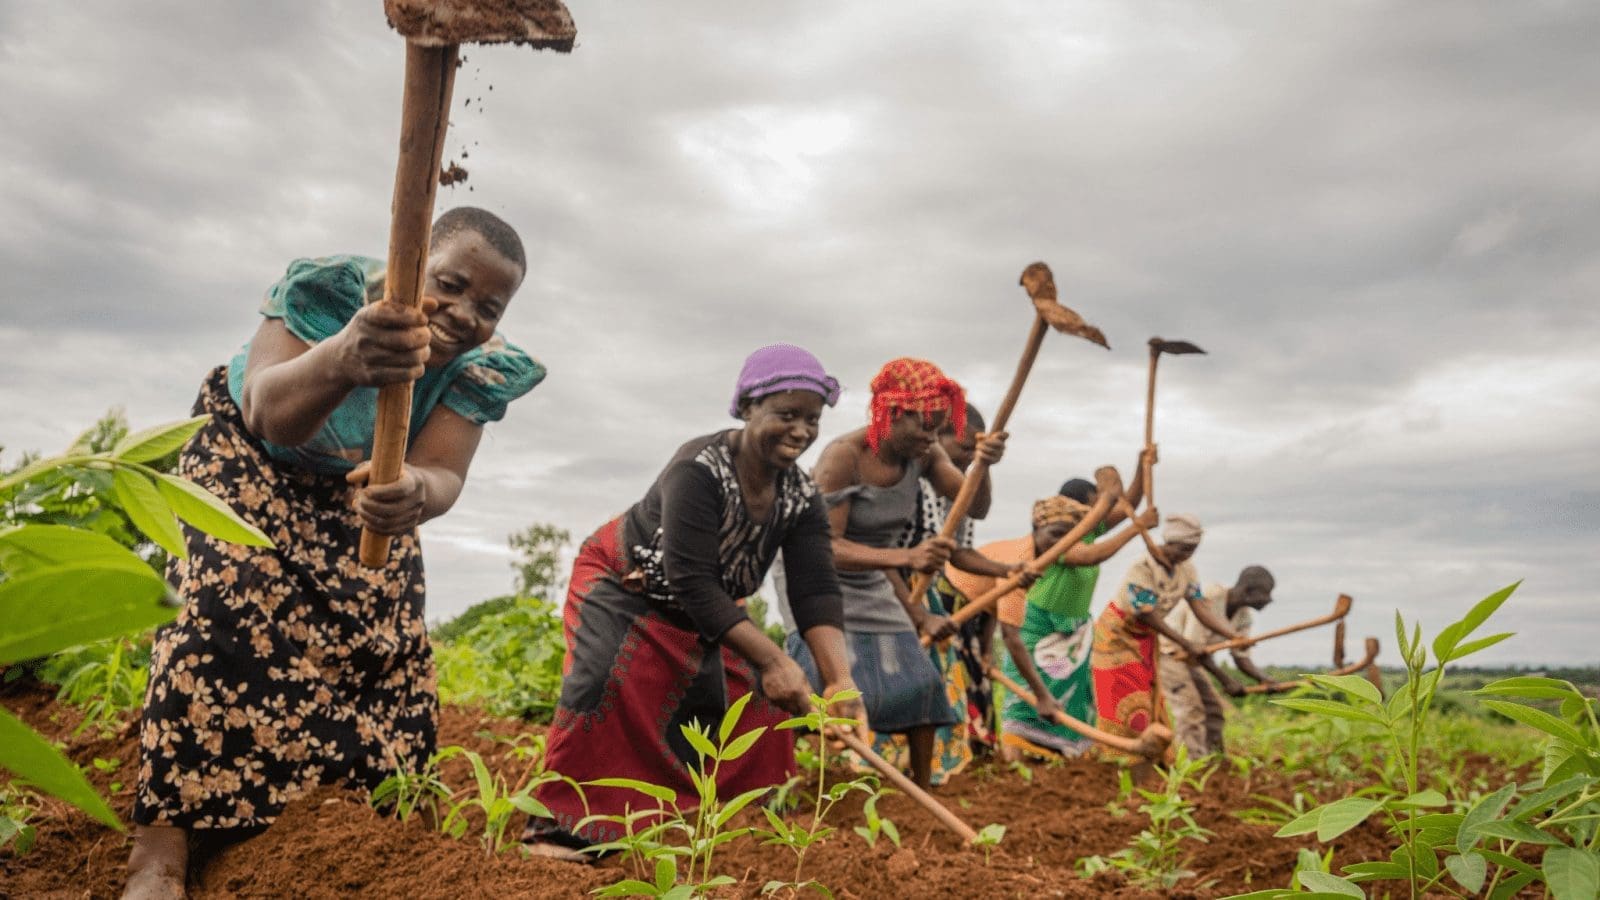 African Development Bank to mobilize US$10 billion to boost food production in Africa